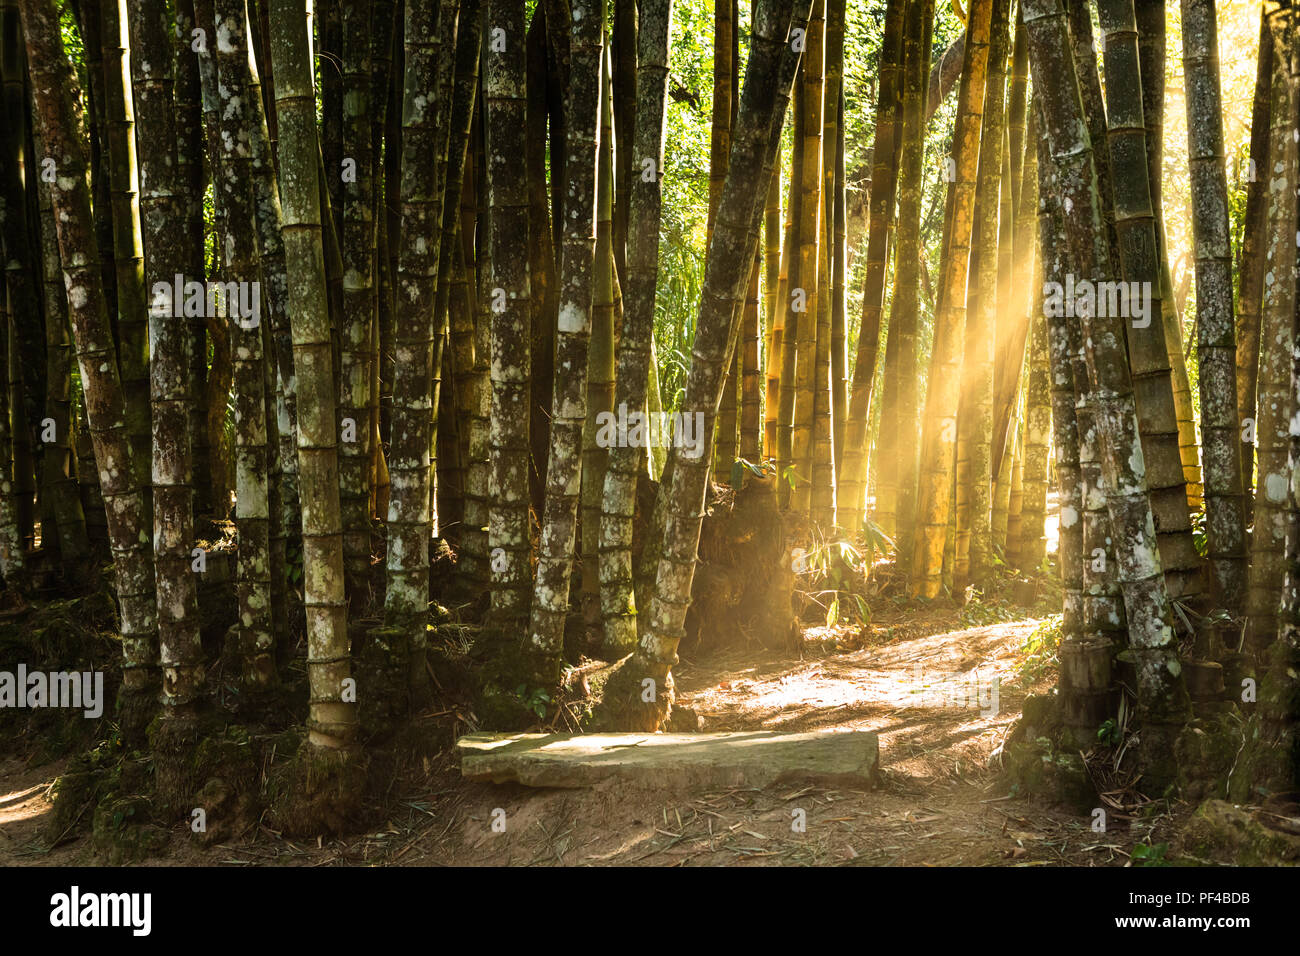 Giant bamboo forest Stock Photo